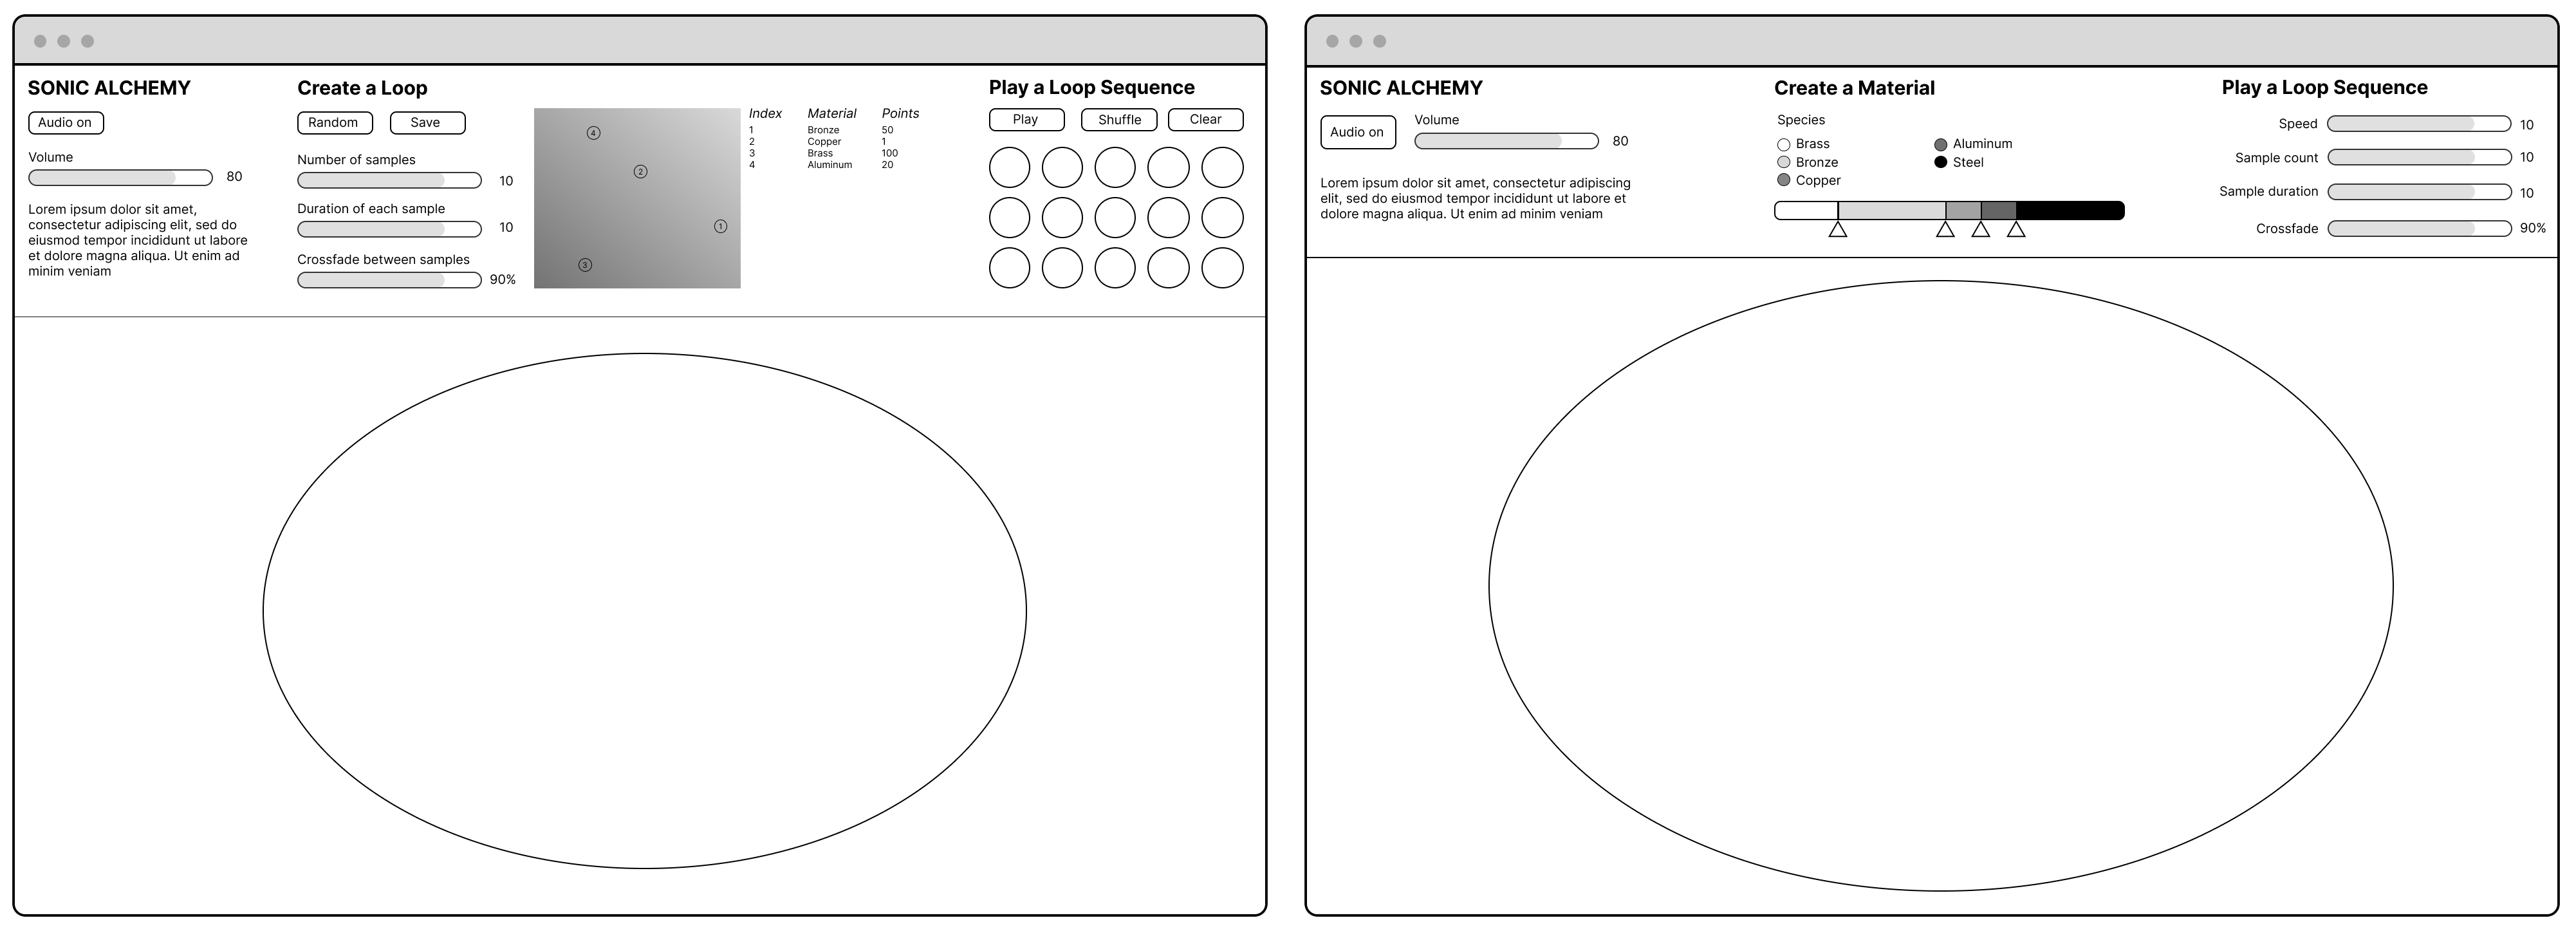 Two wireframes depicting early interface designs for Metal Sampler